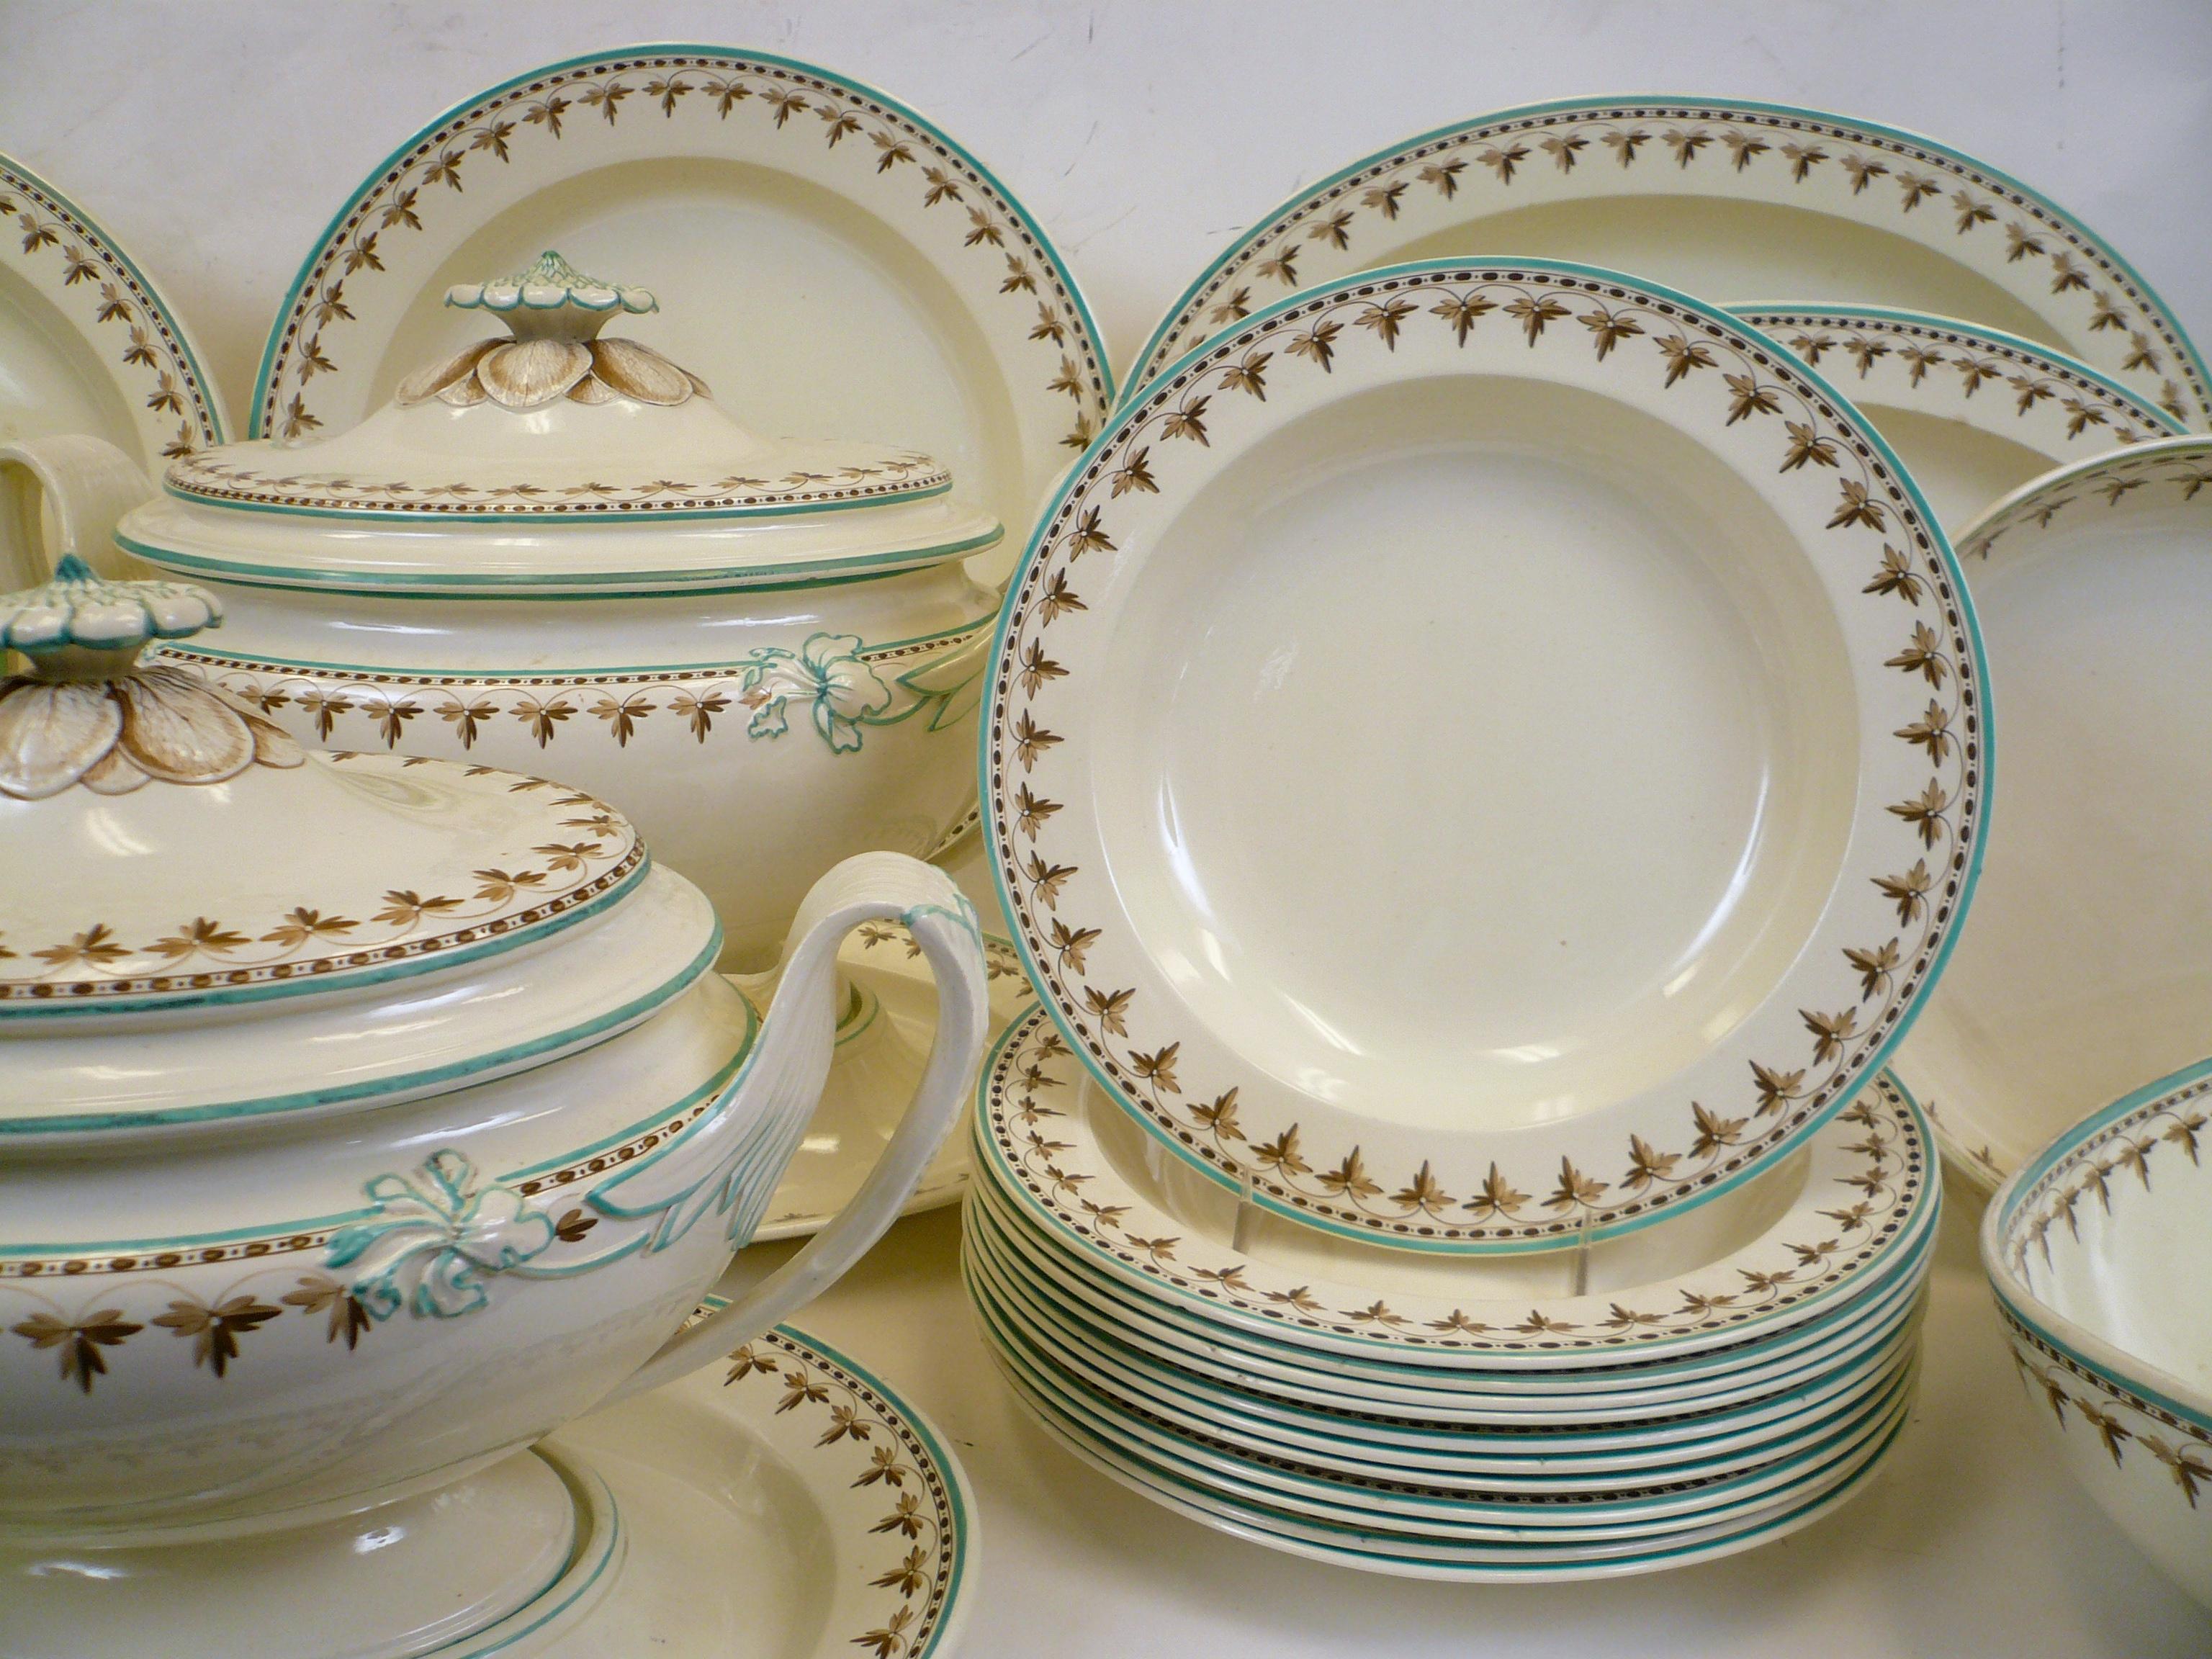 Creamware is a cream colored refined earthenware first produced in the mid-18th century, and perfected by Wedgwood in the 1760s. This dinner service with it's Classic Wedgwood shapes features acanthus leaf motifs and artichoke finials. It is